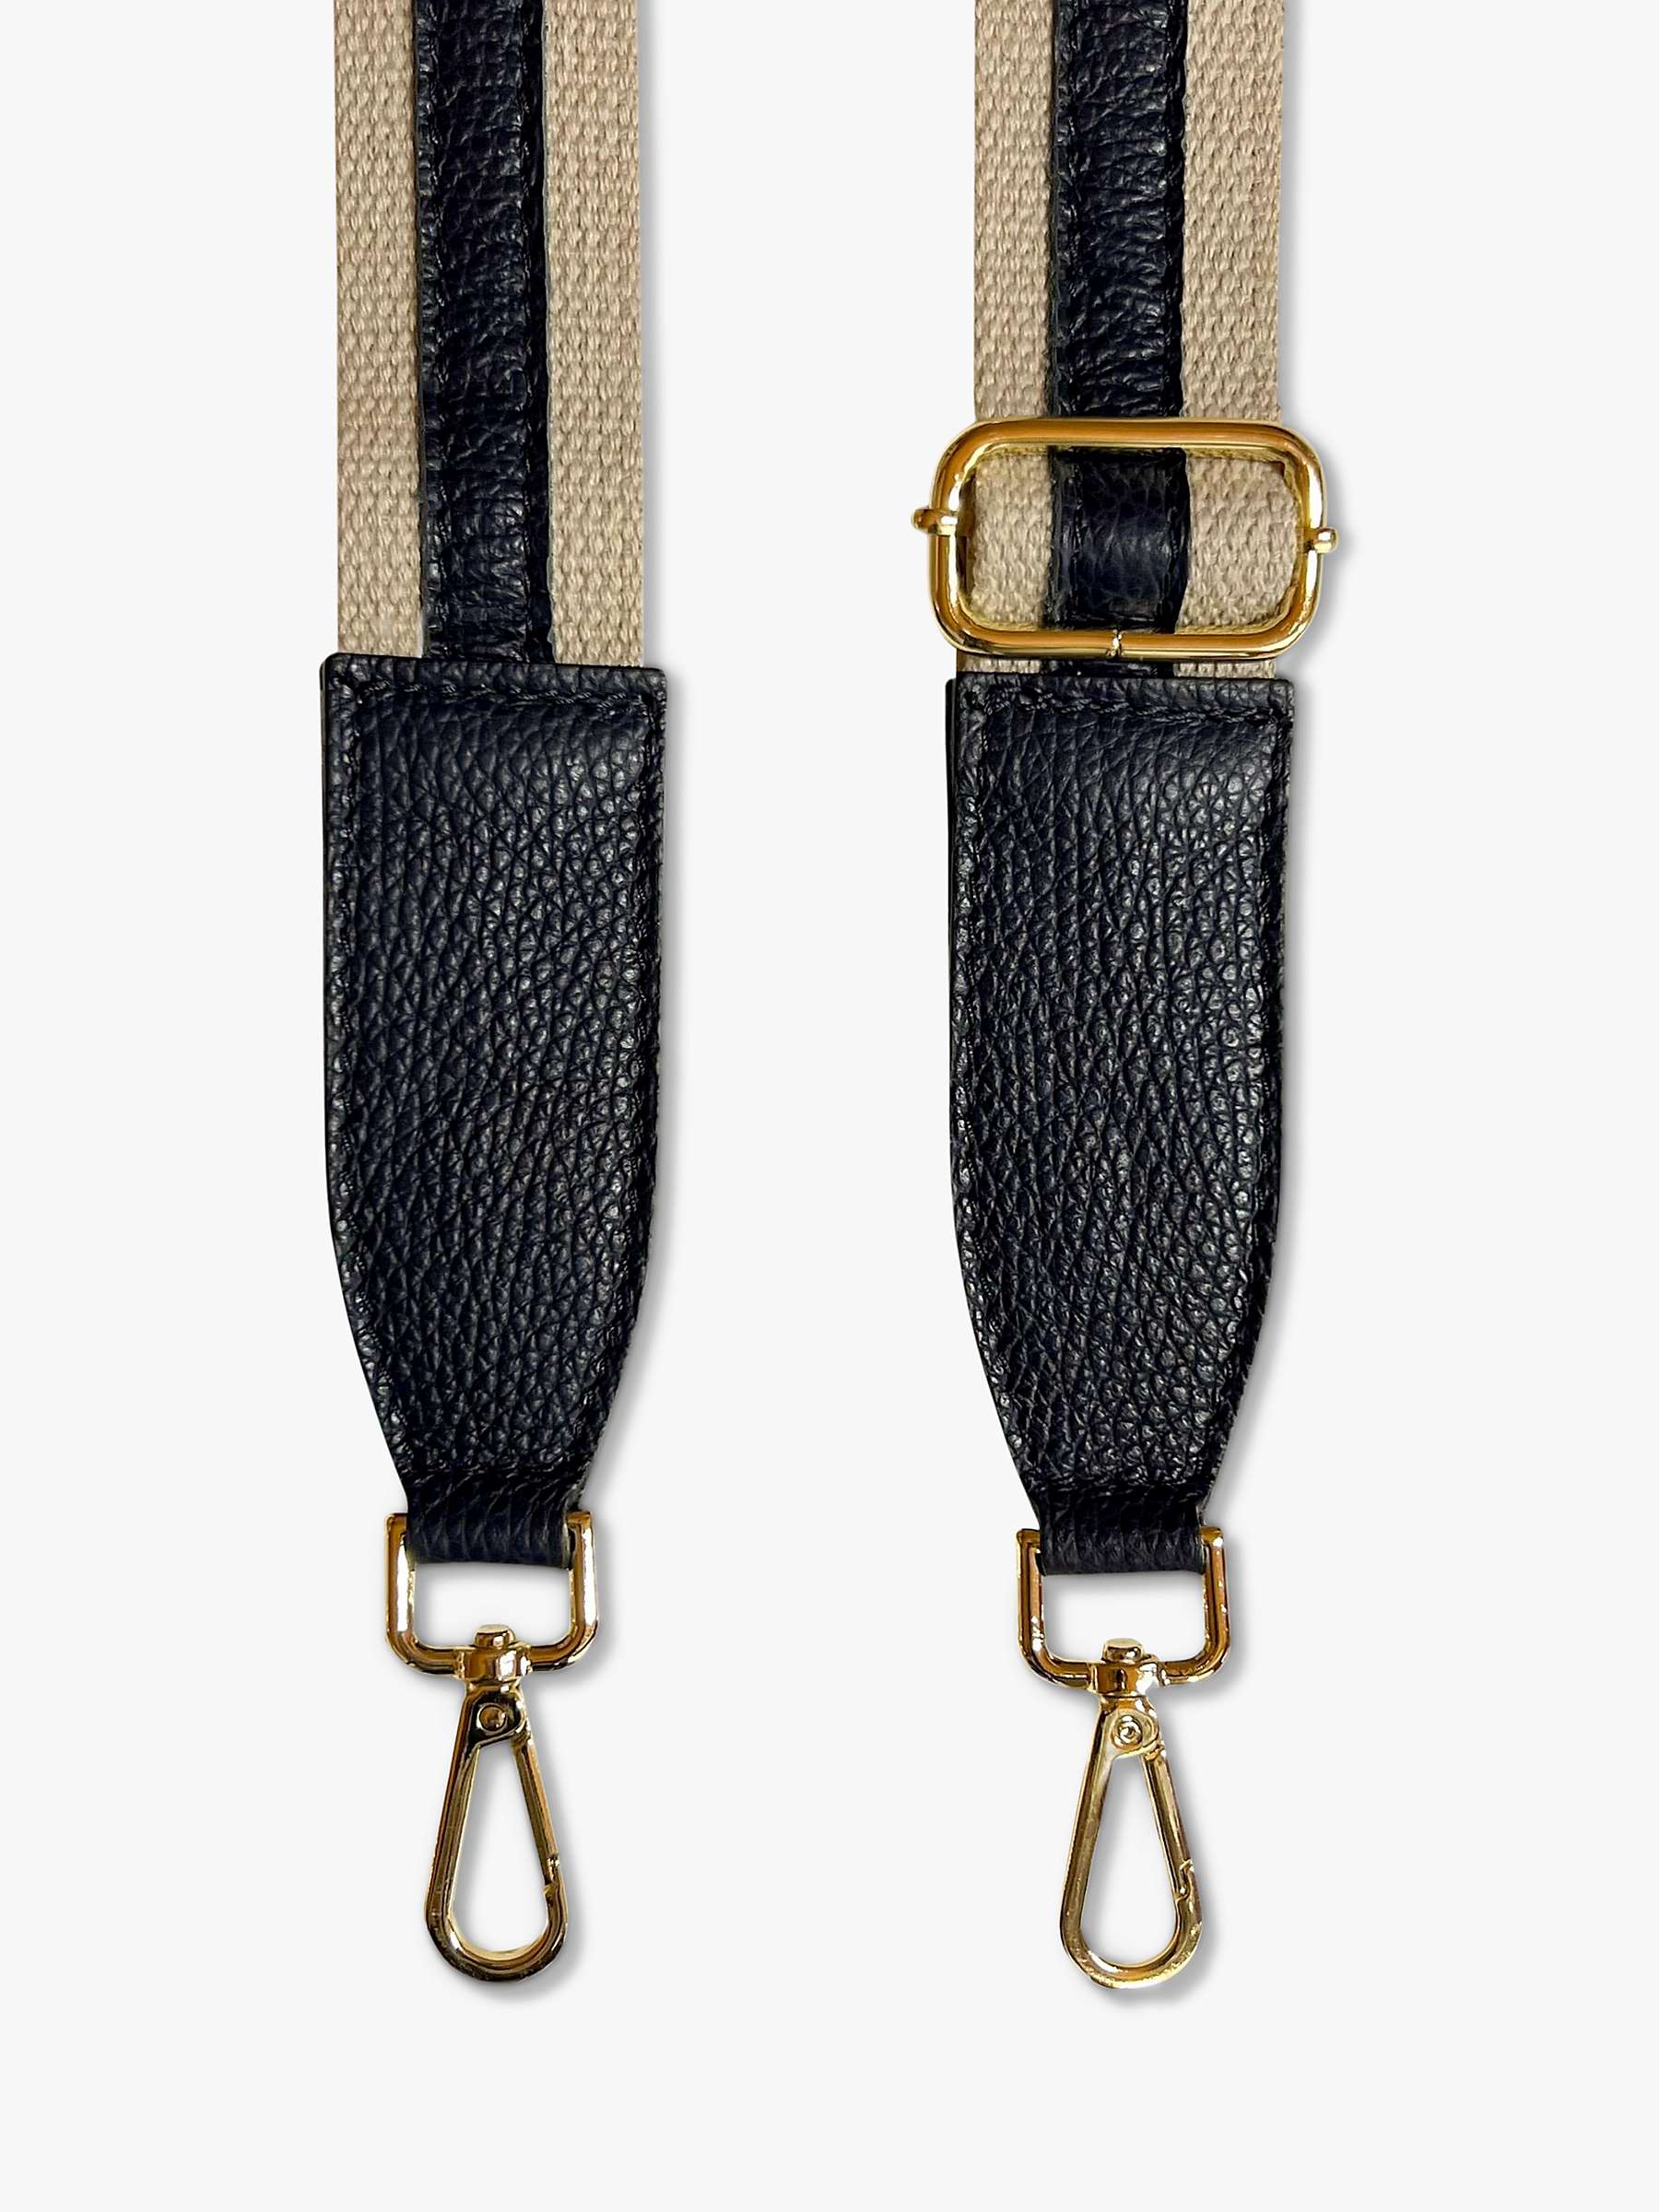 Buy Apatchy Leather & Canvas Striped Handbag Strap Online at johnlewis.com